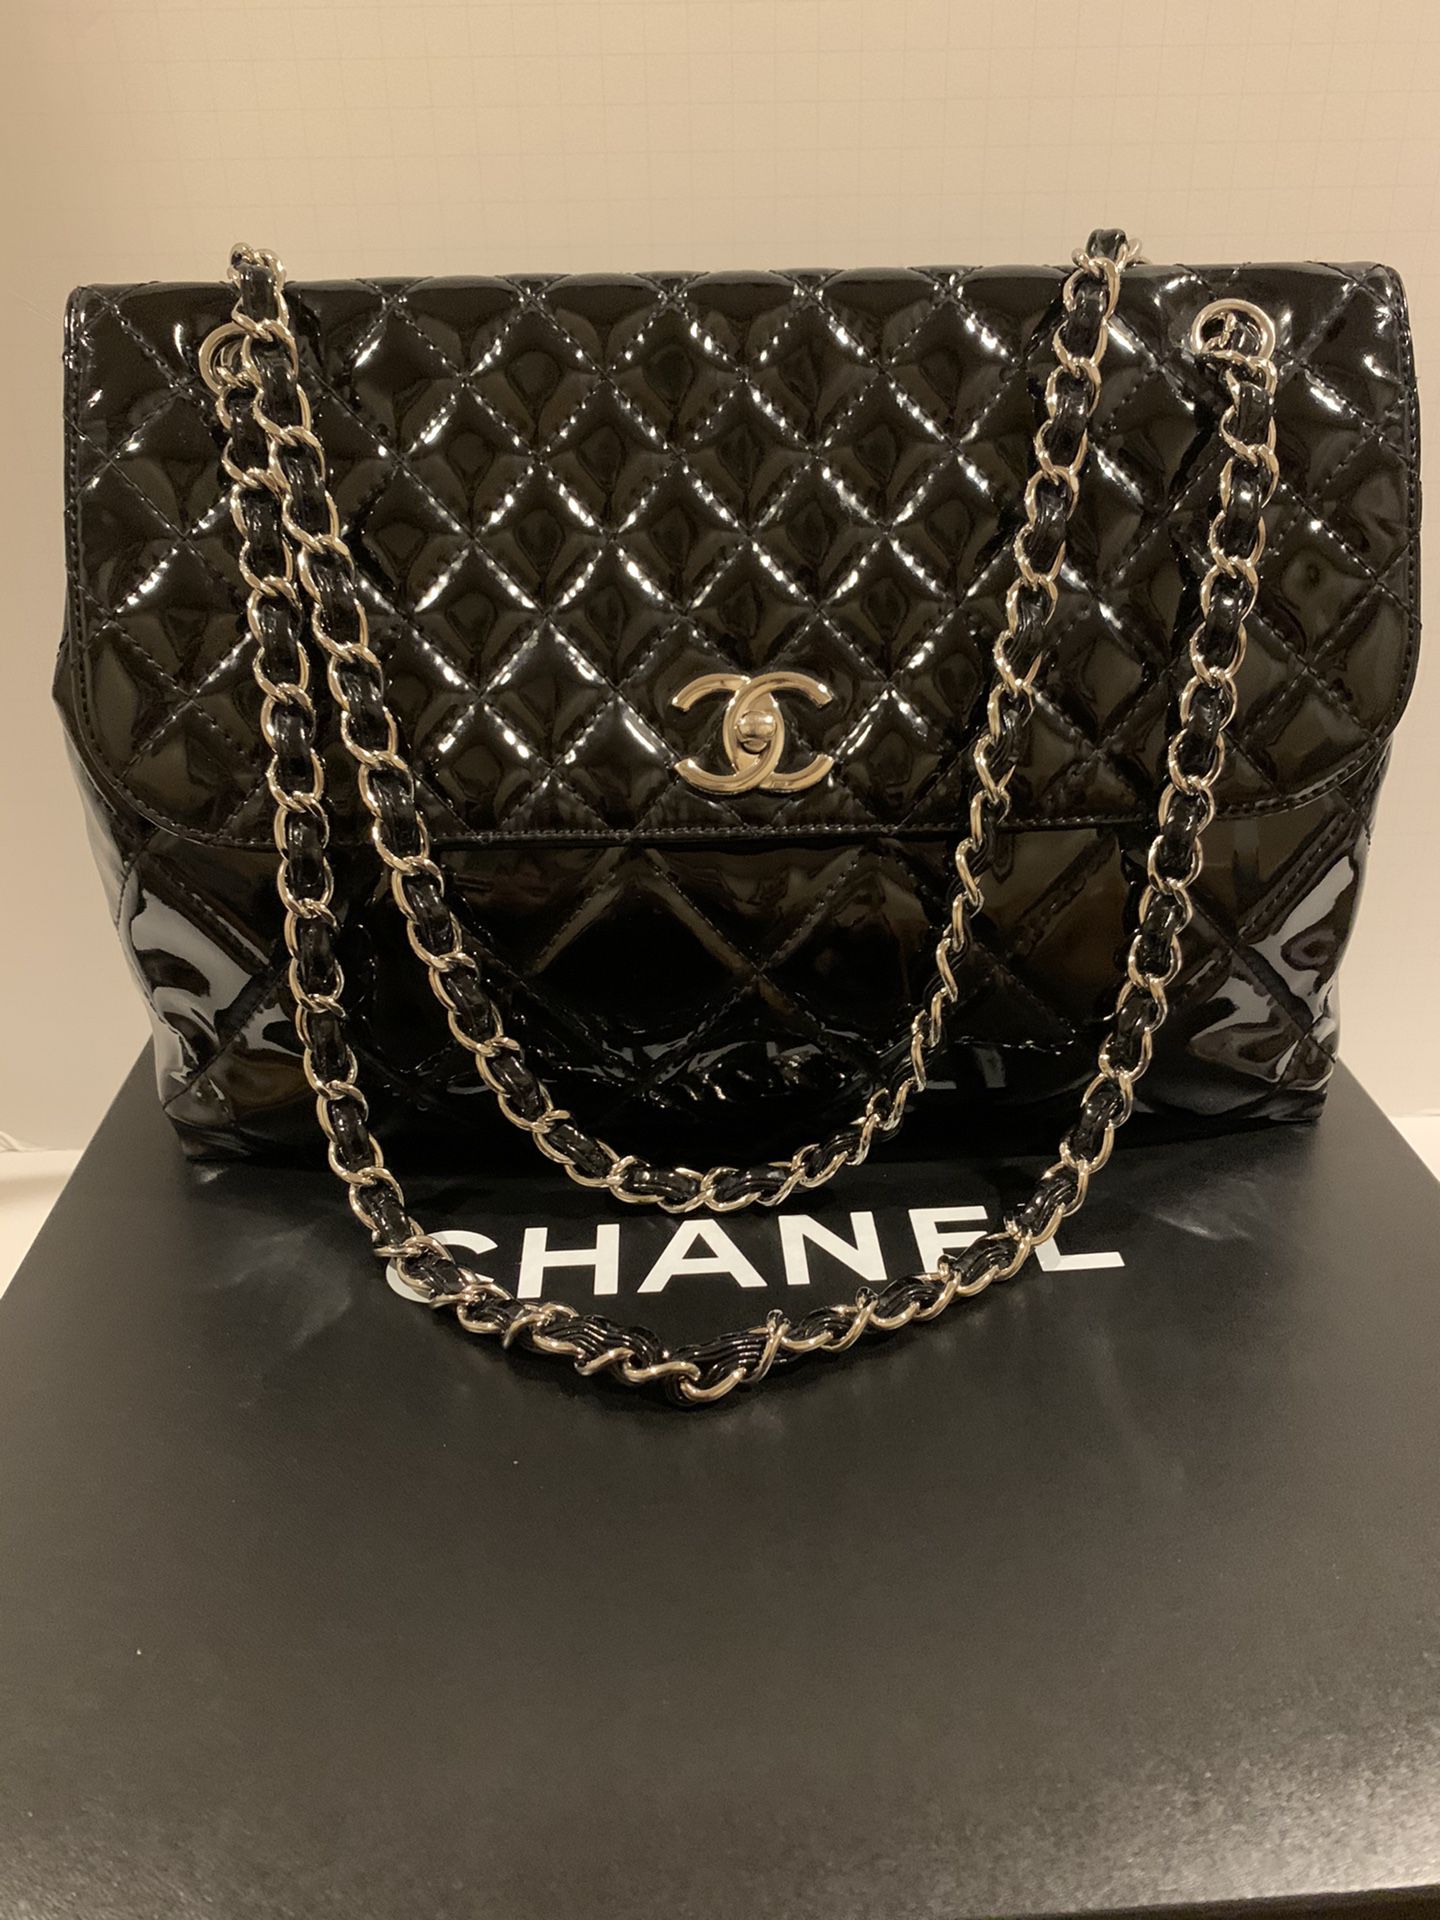 Chanel maxi large patent leather flap bag - black /silver AUTHENTIC